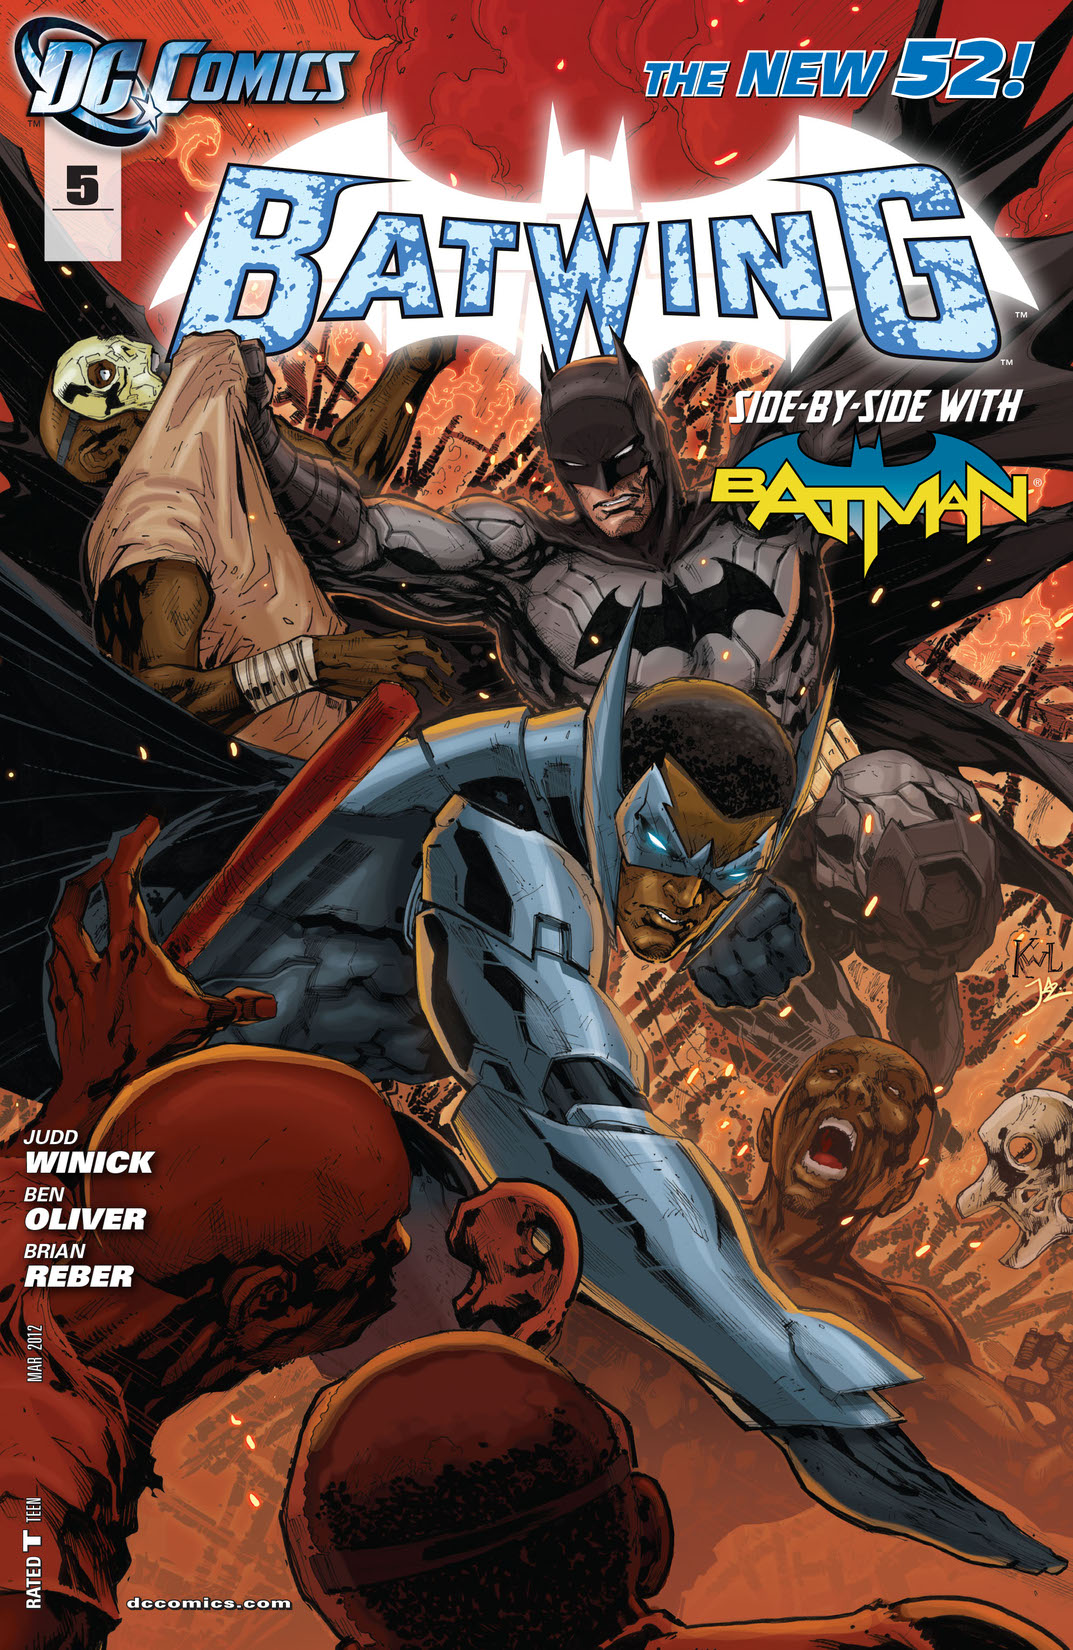 Batwing #5 preview images